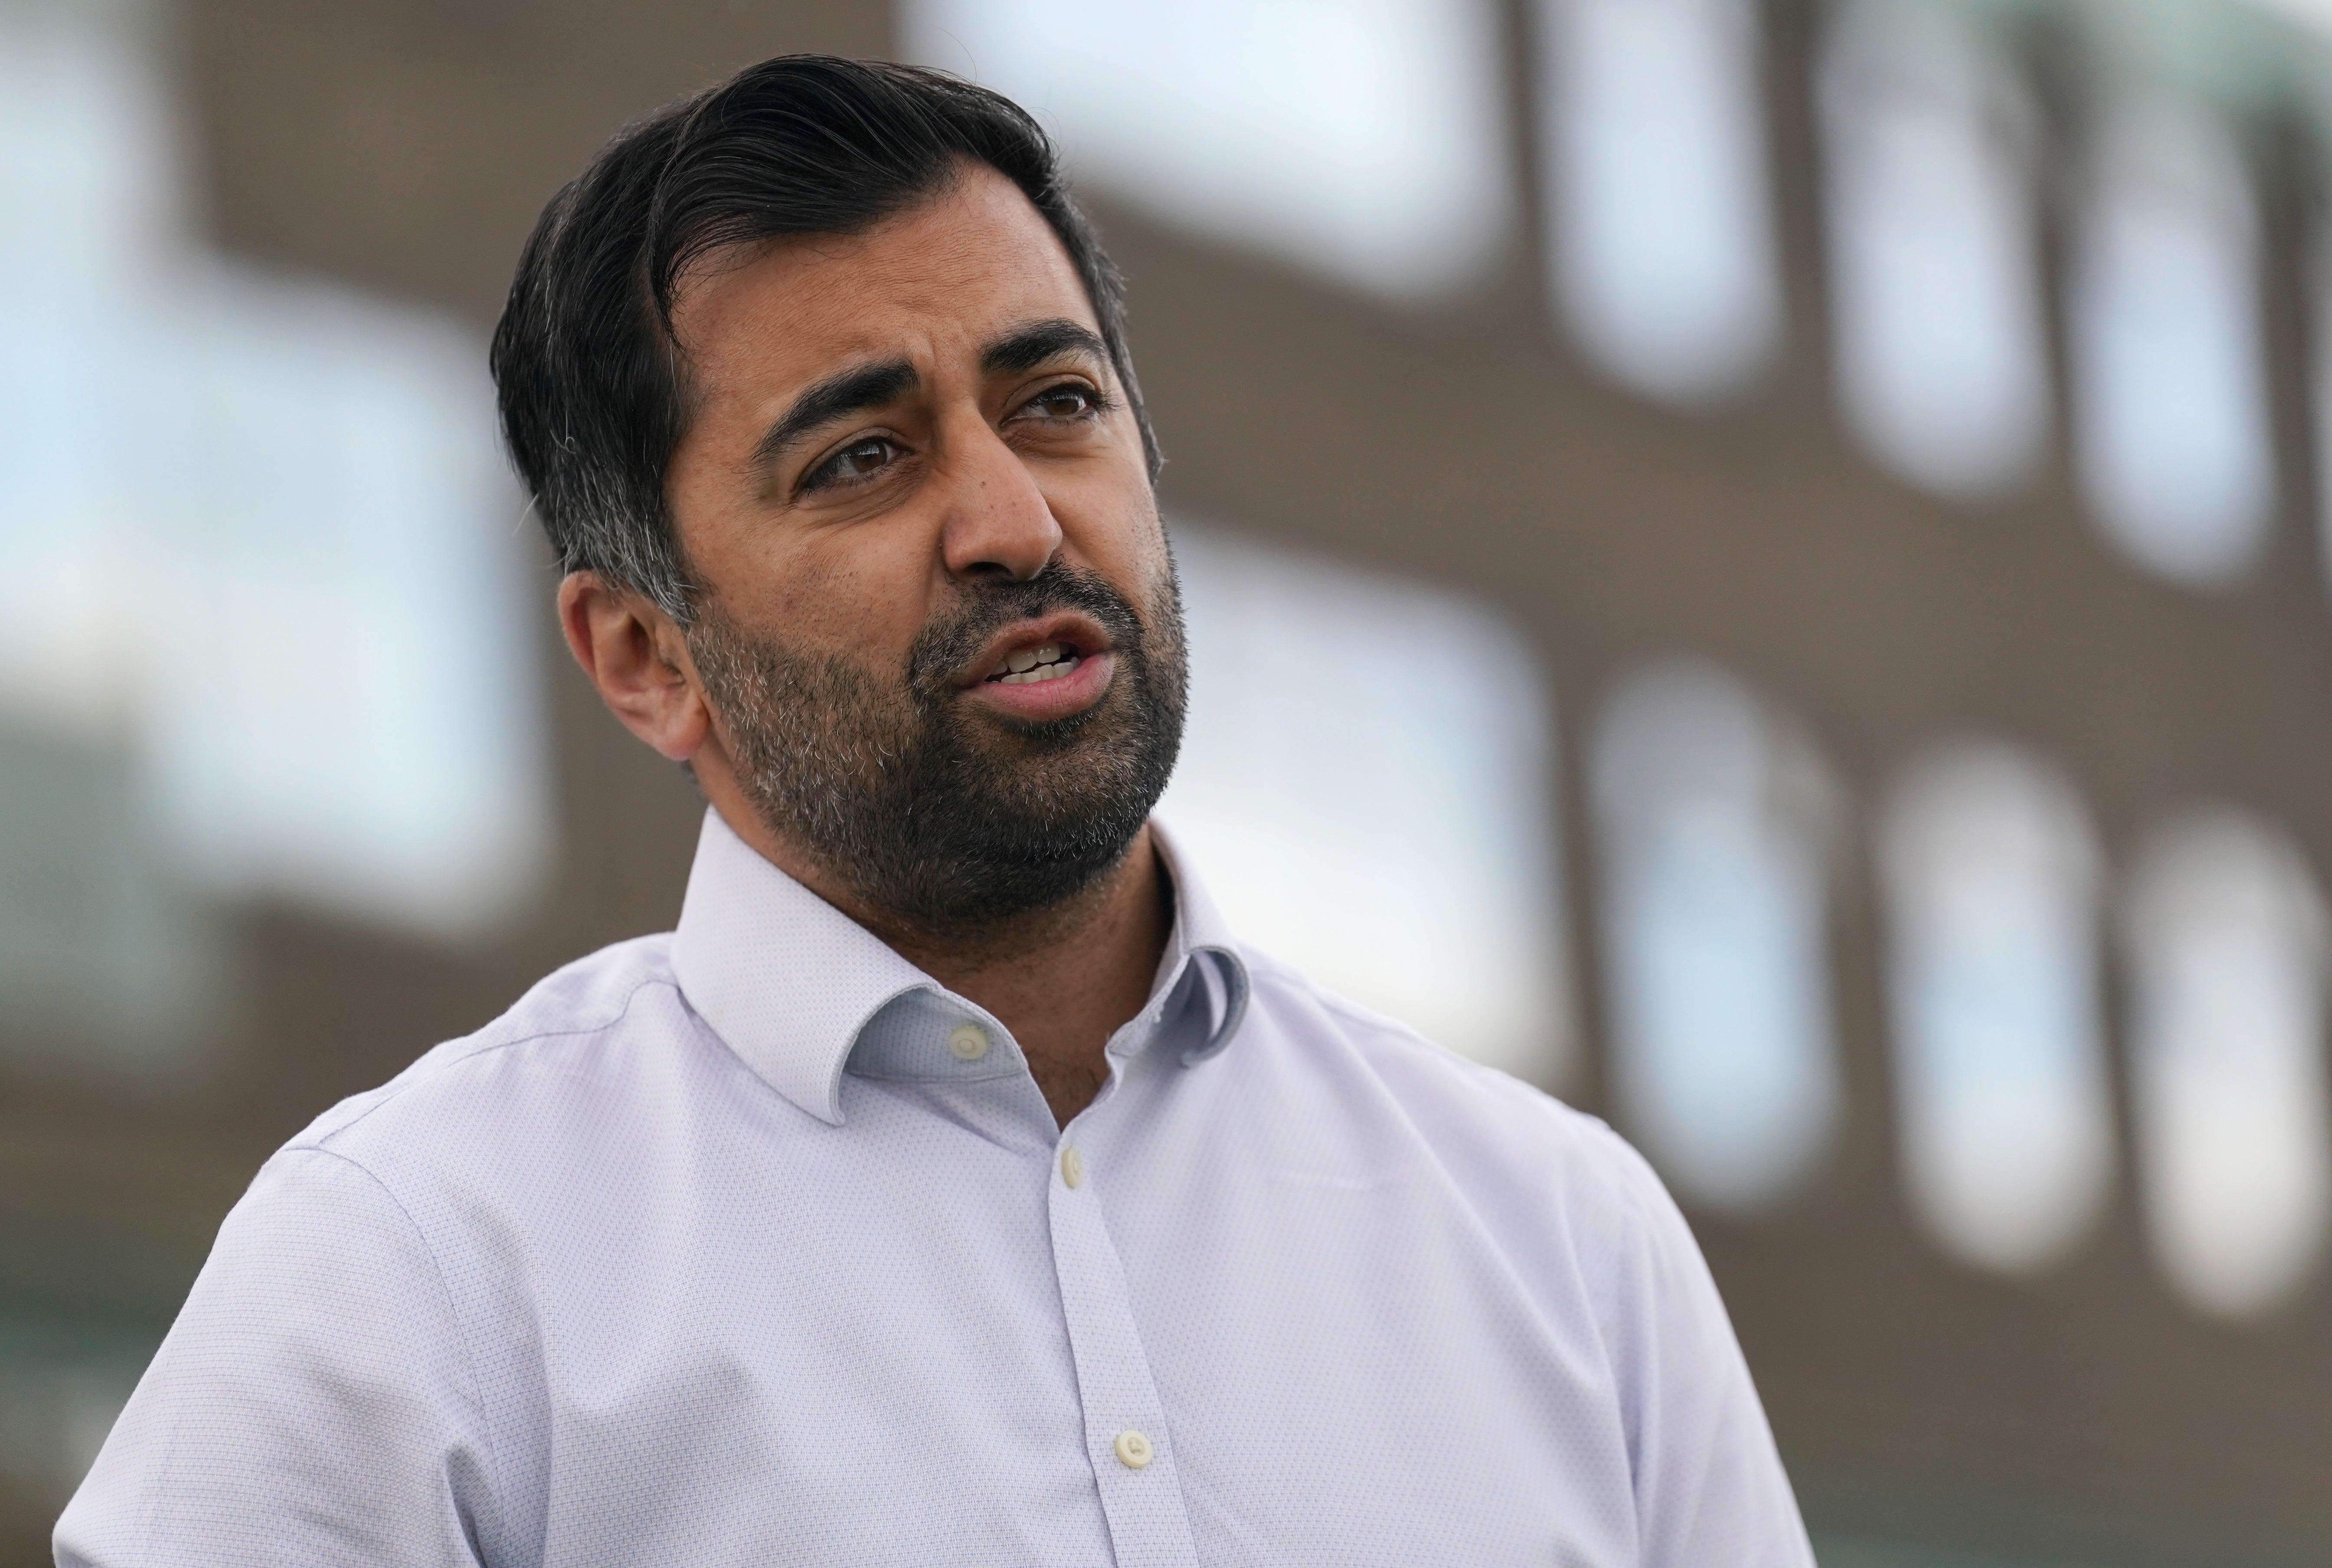 Health Secretary Humza Yousaf said the Scottish Government would use the research – which found children with learning disabilities were 11 times more likely to die prematurely – to inform its work (Andrew Milligan/PA)